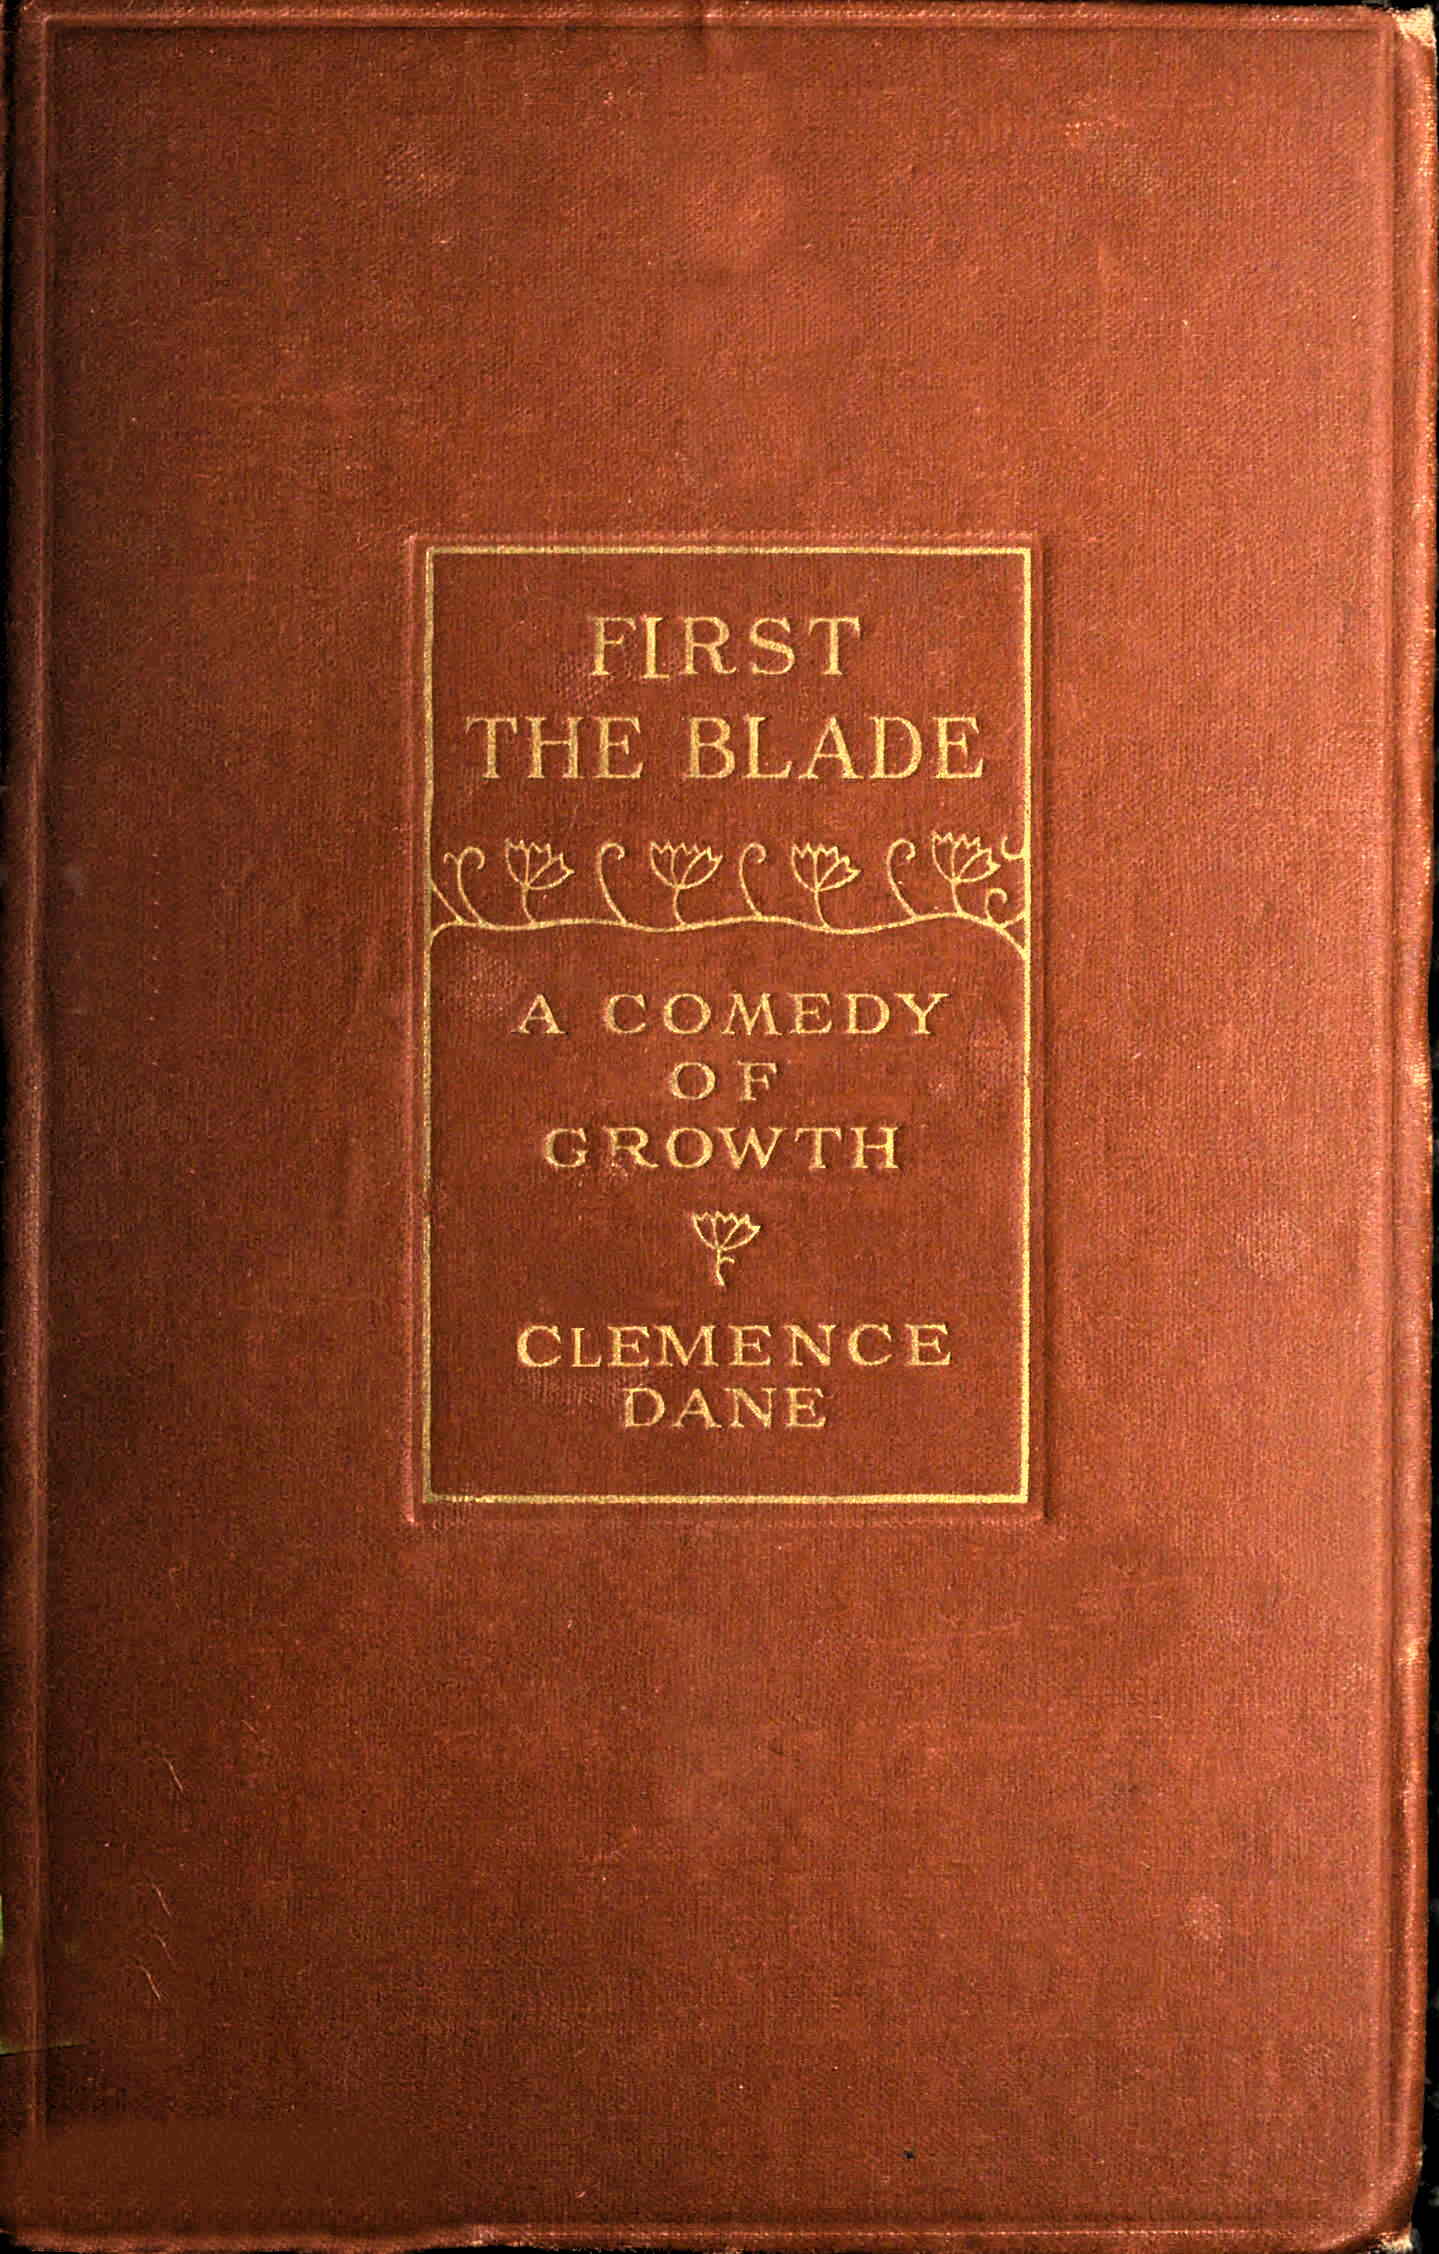 First the Blade, a Comedy of Growth, by Clemence Dane—A Project Gutenberg eBook image